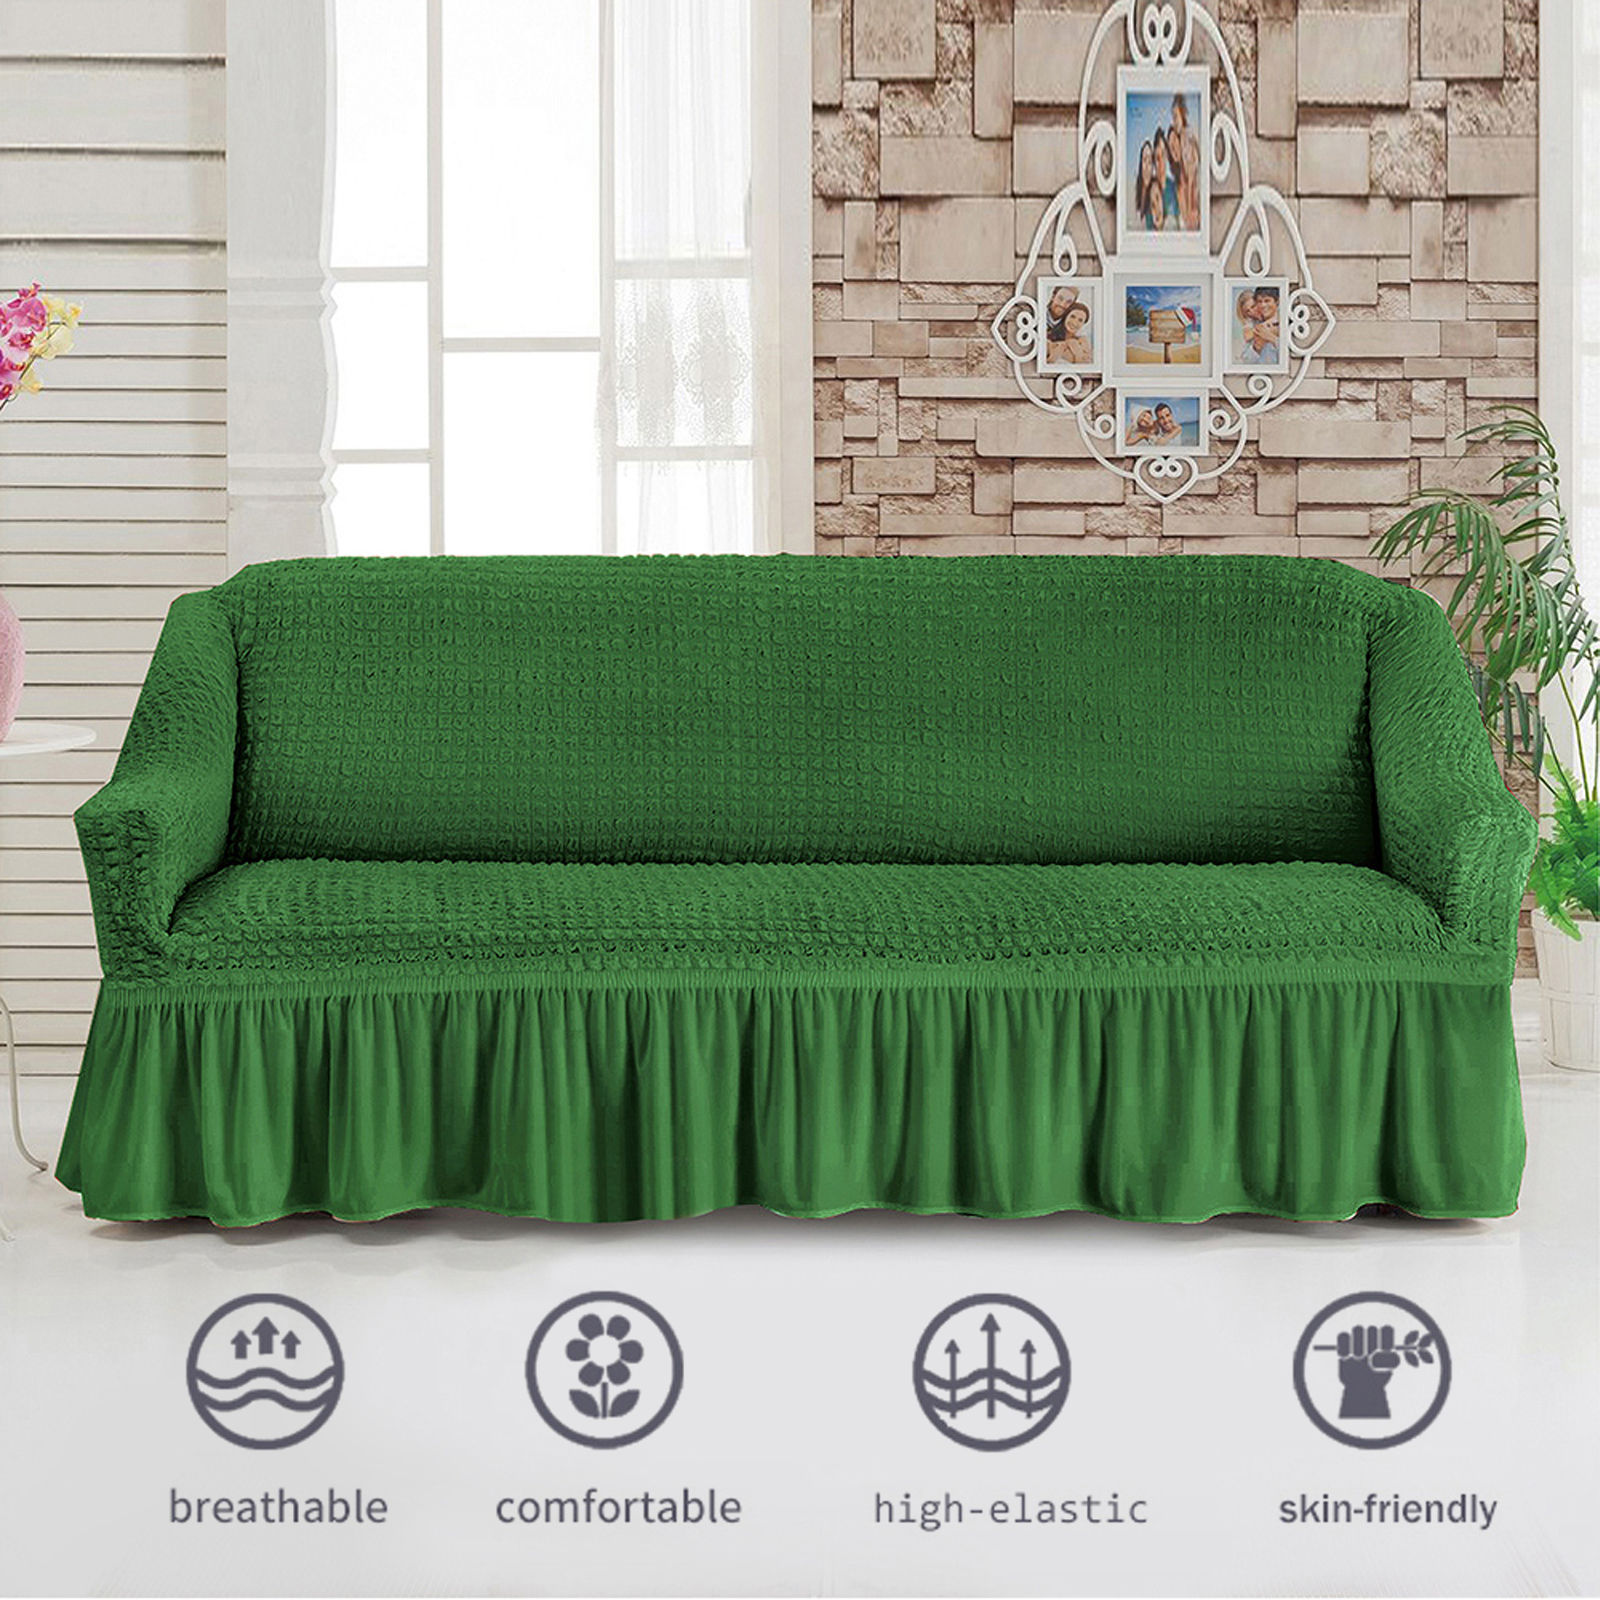 Stretch Sofa Slipcover, 3 Seater Sofa Slipcovers With Skirt With Armless Soft Sofa Cover Elastic Straps Sofa Slipcover For Living Room Kids Pets-Green A-Small